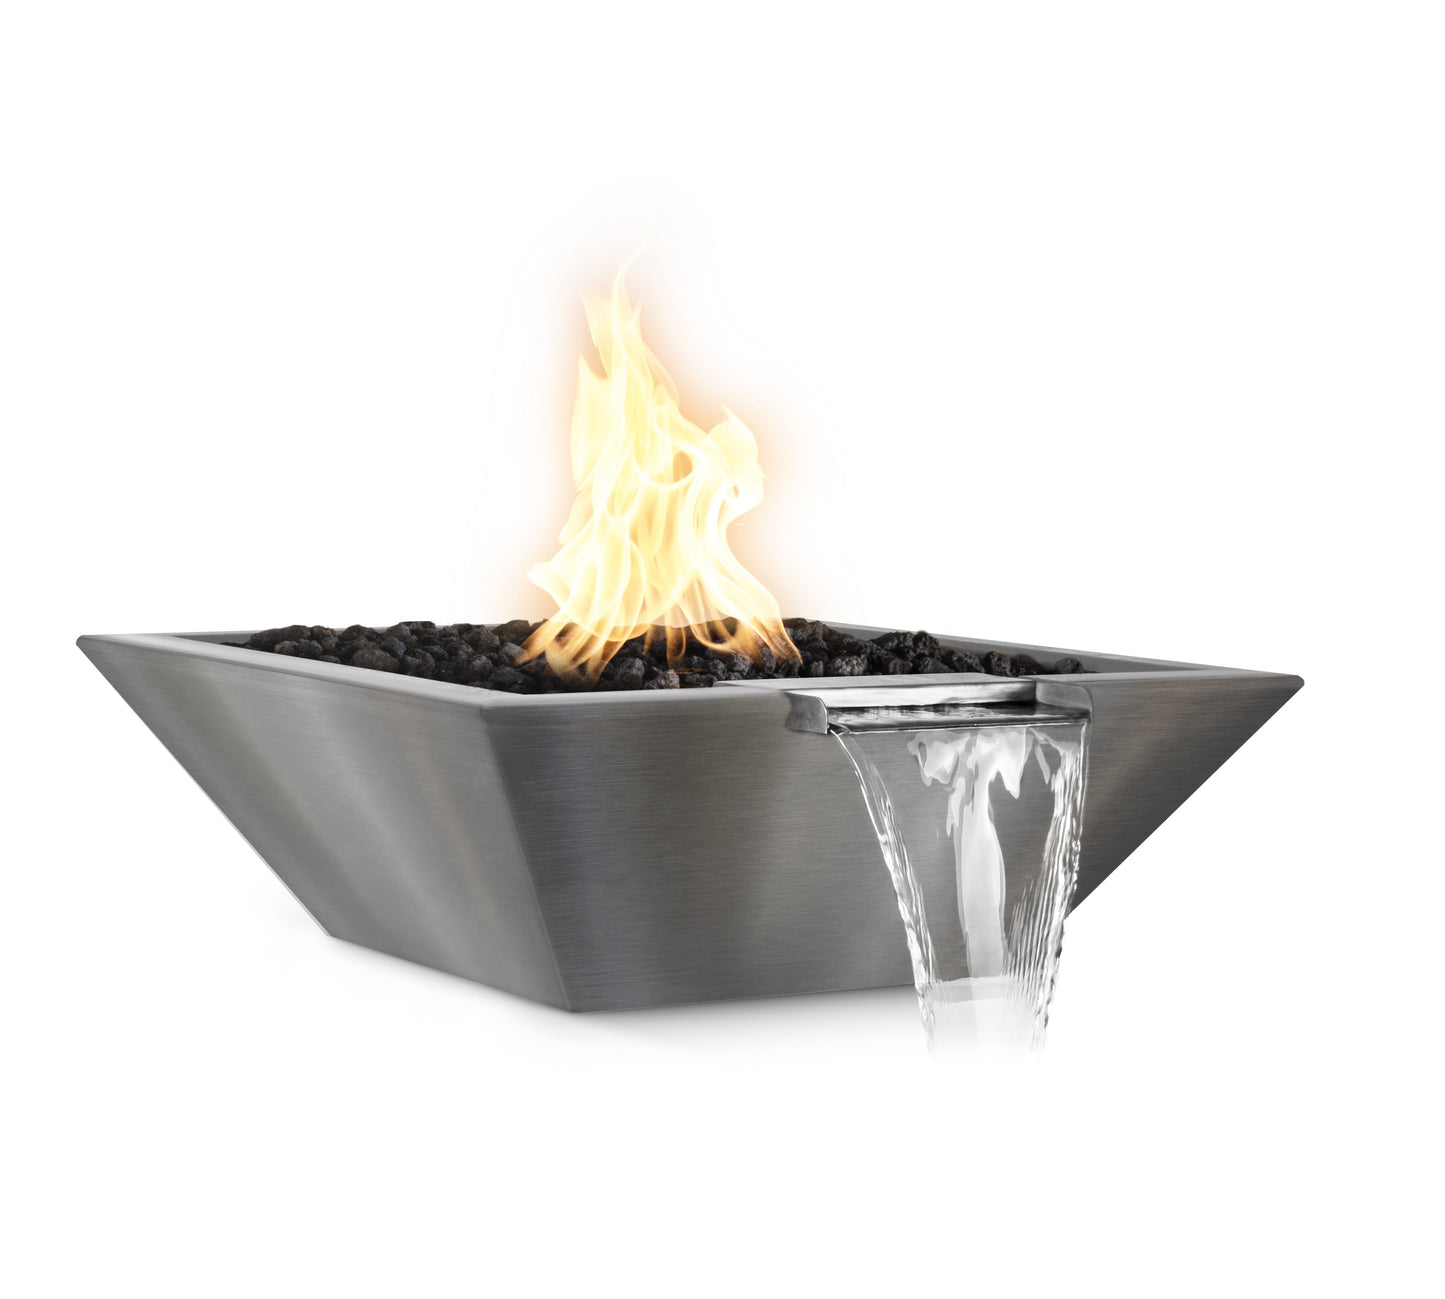 The Outdoor Plus Square Maya 24" Stainless Steel Liquid Propane Fire & Water Bowl with Match Lit with Flame Sense Ignition